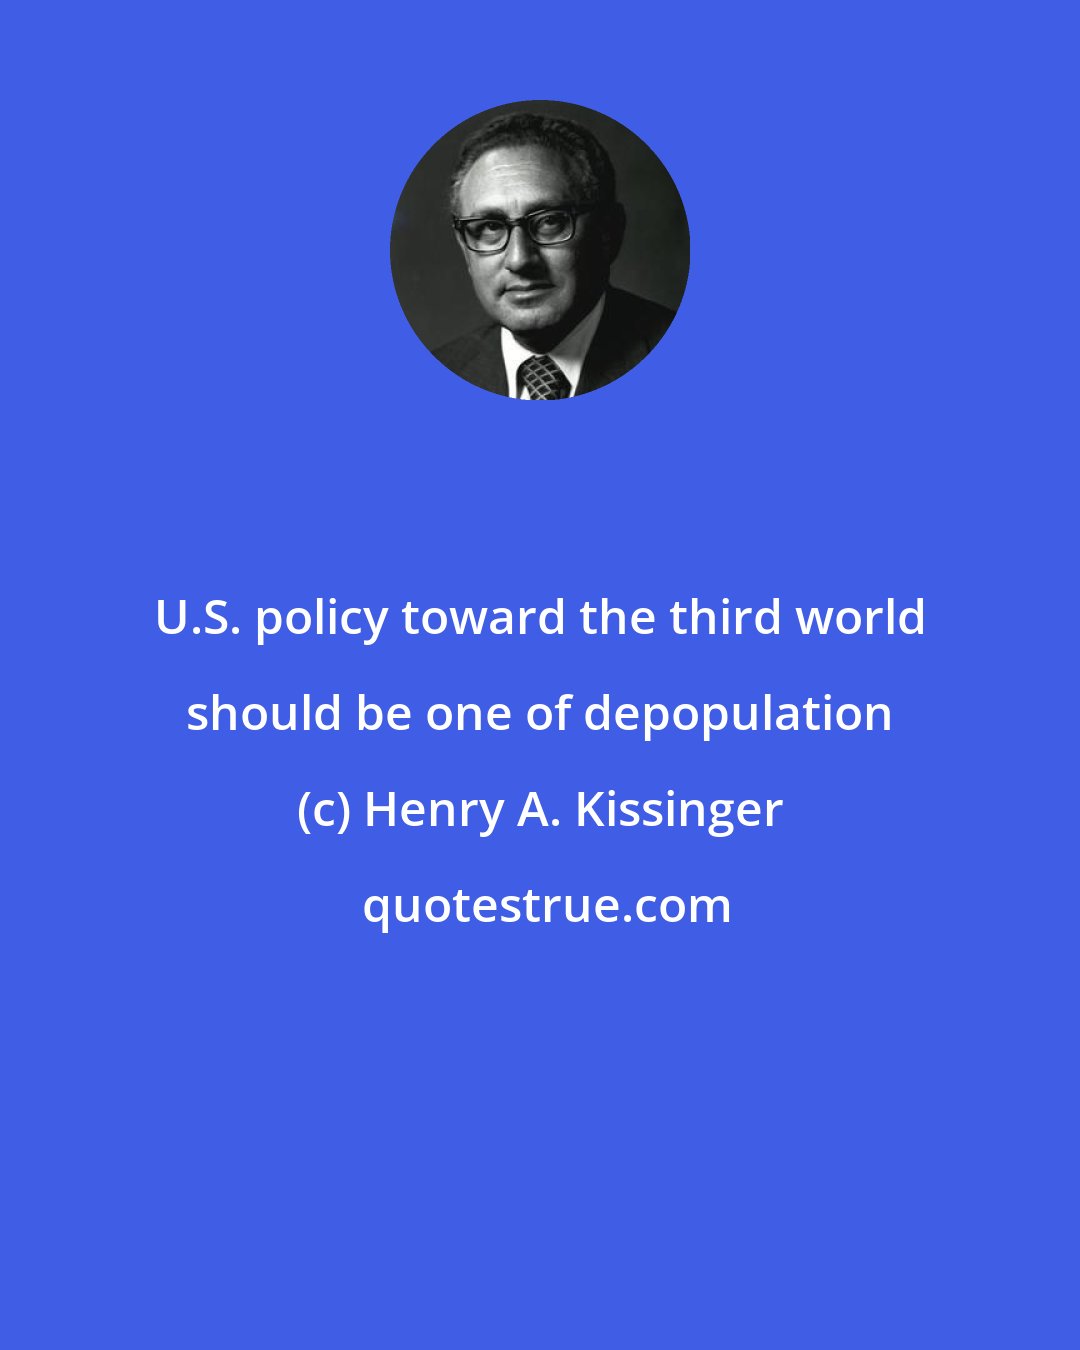 Henry A. Kissinger: U.S. policy toward the third world should be one of depopulation